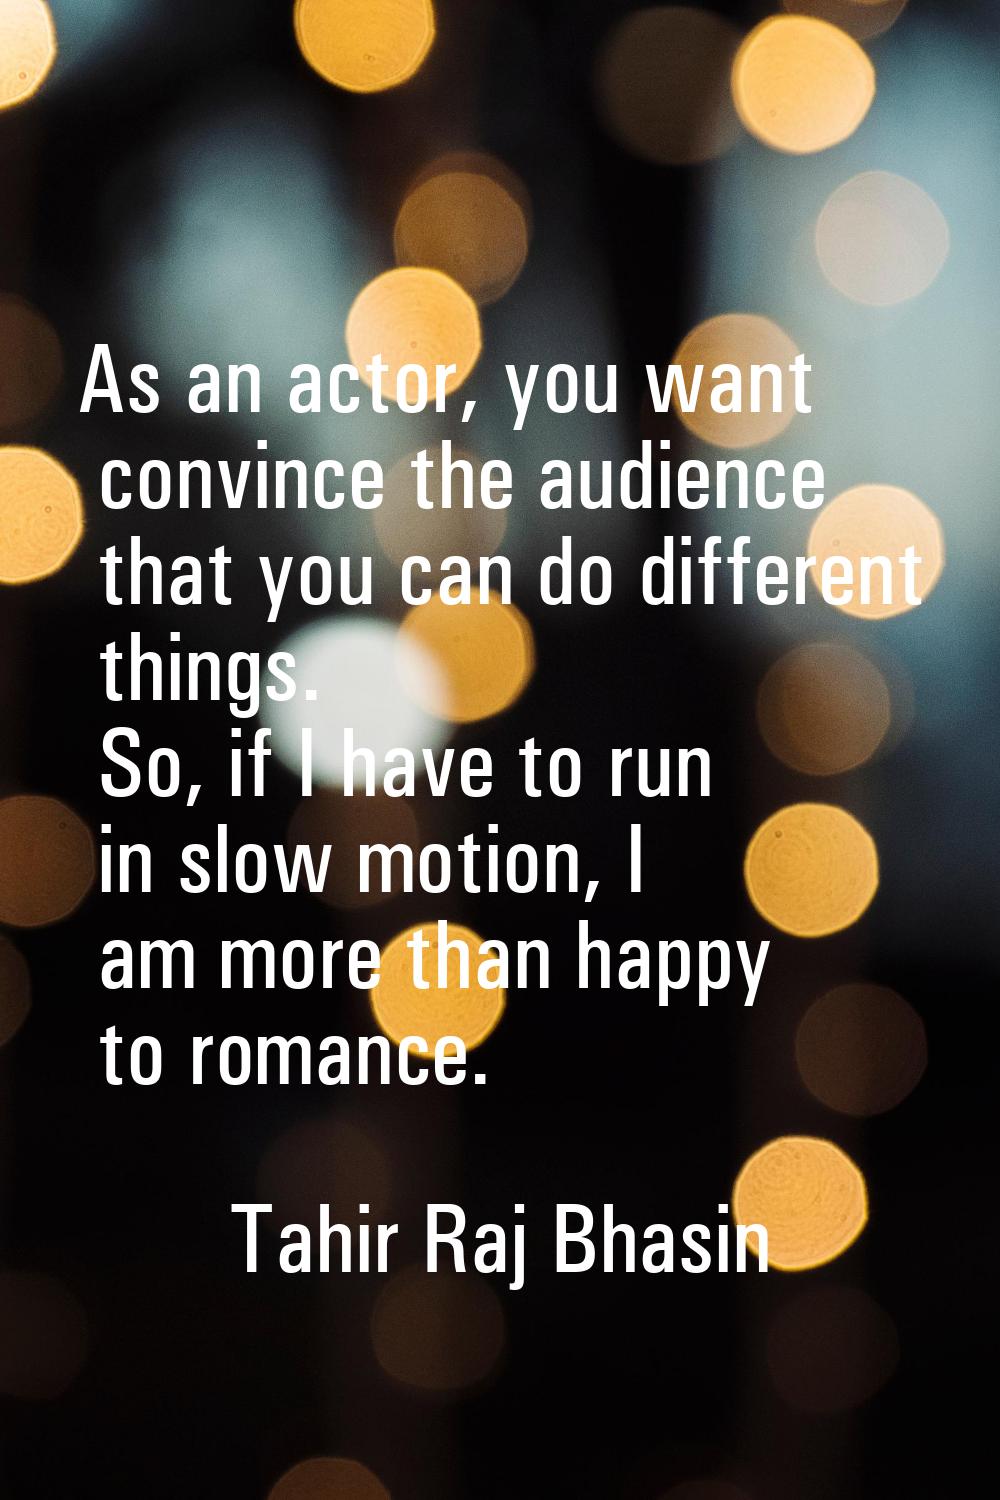 As an actor, you want convince the audience that you can do different things. So, if I have to run 